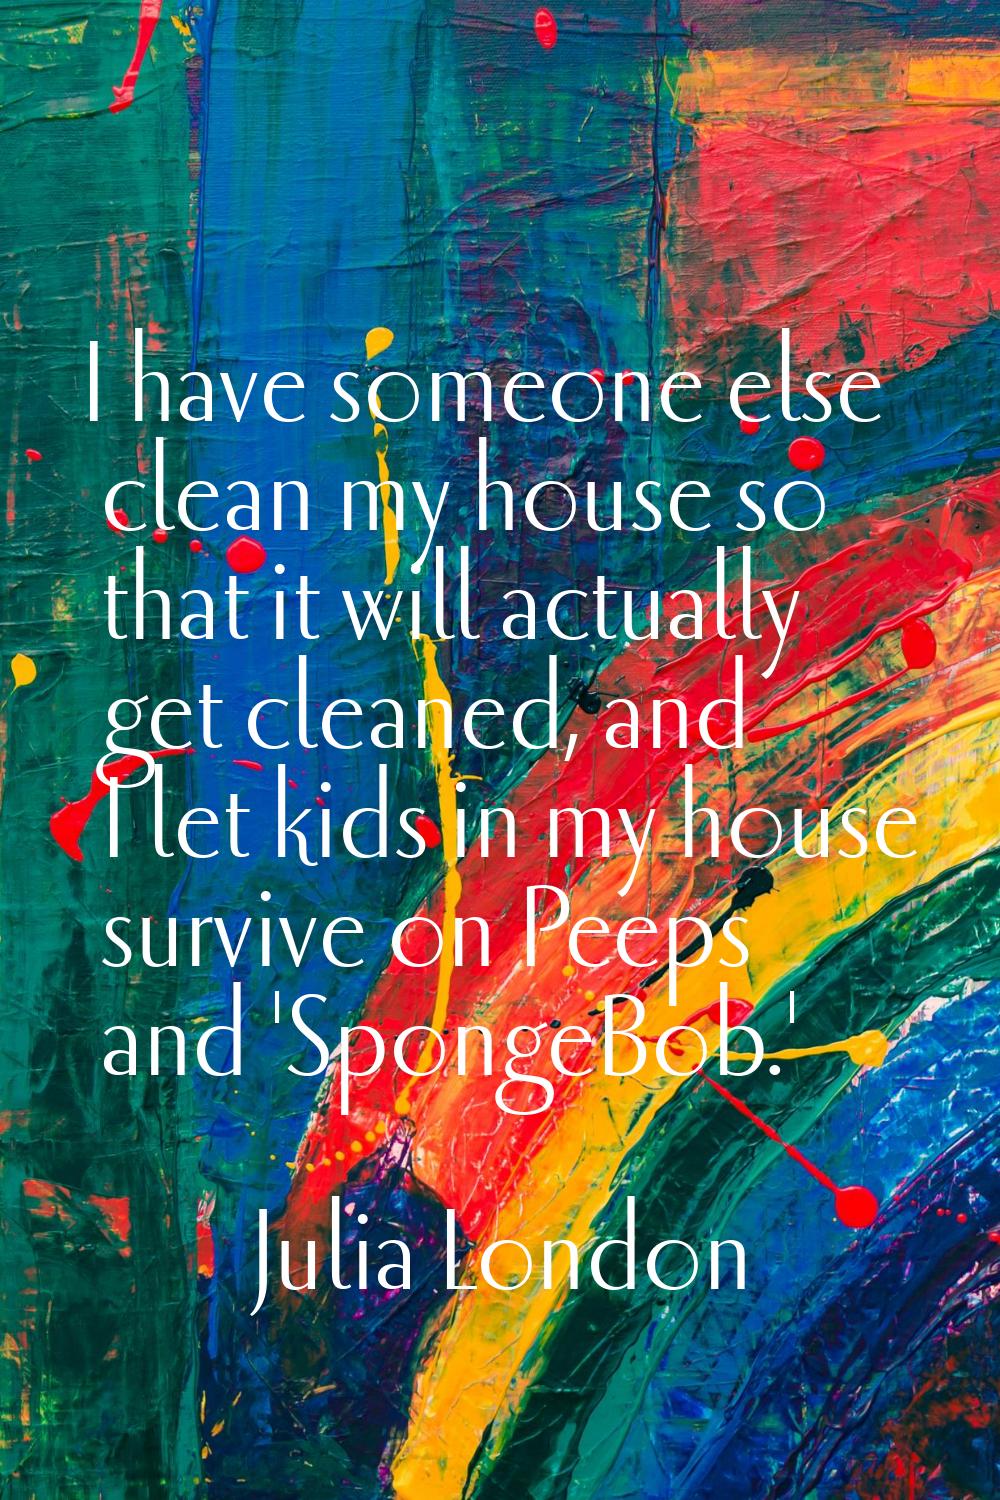 I have someone else clean my house so that it will actually get cleaned, and I let kids in my house